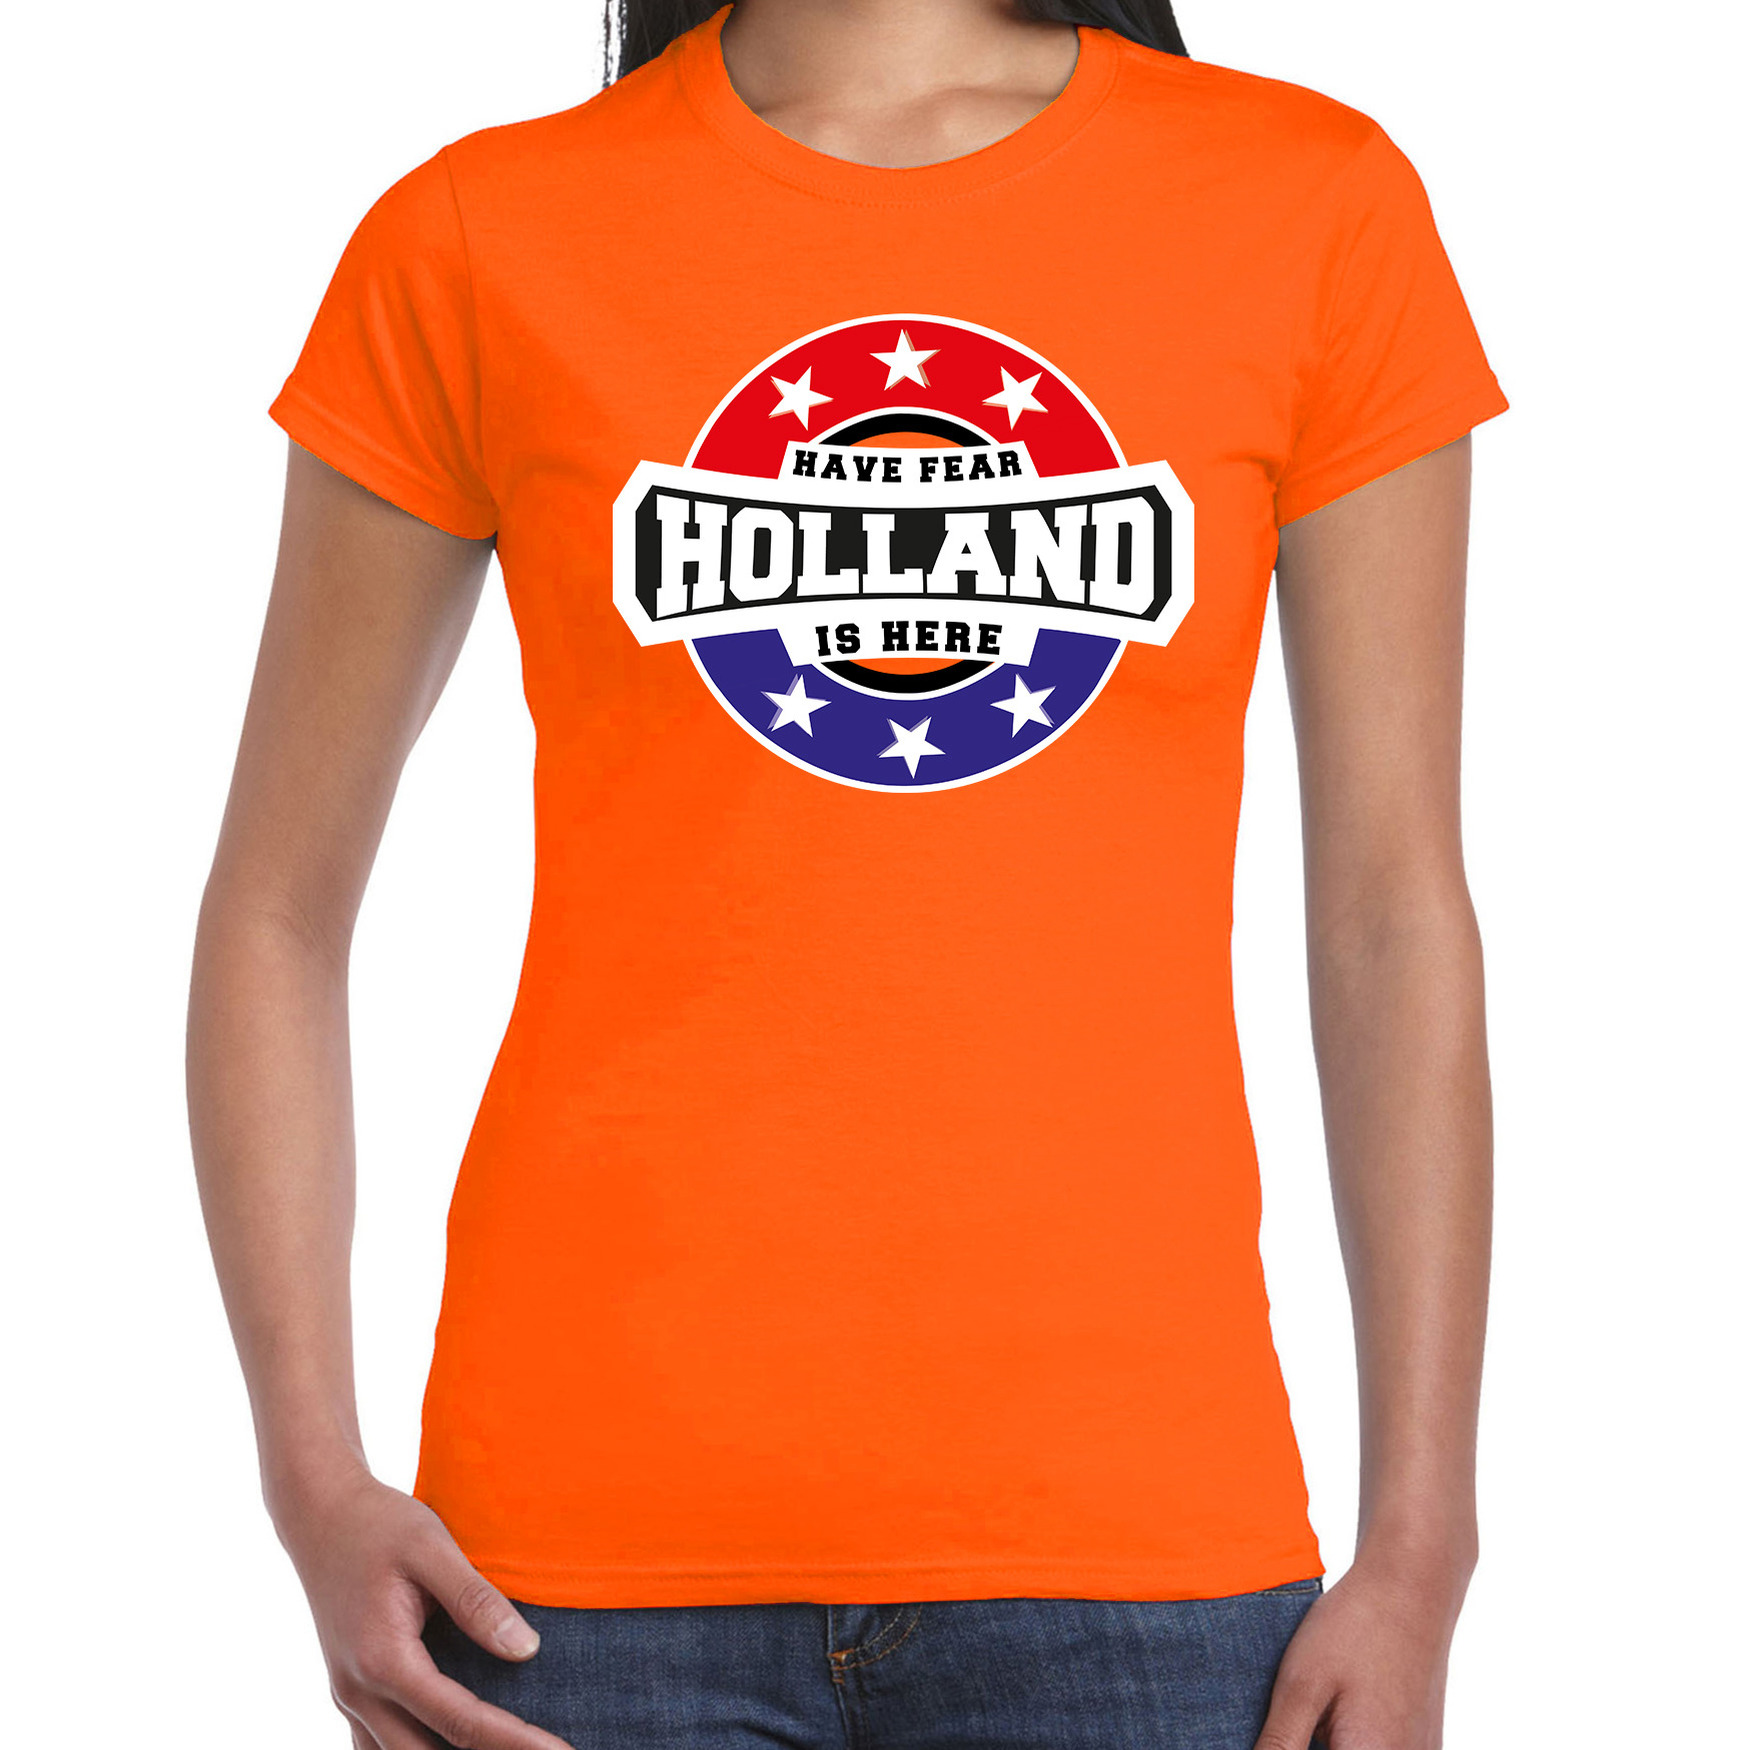 Have fear Holland is here / Holland supporter t-shirt oranje voor dames ...